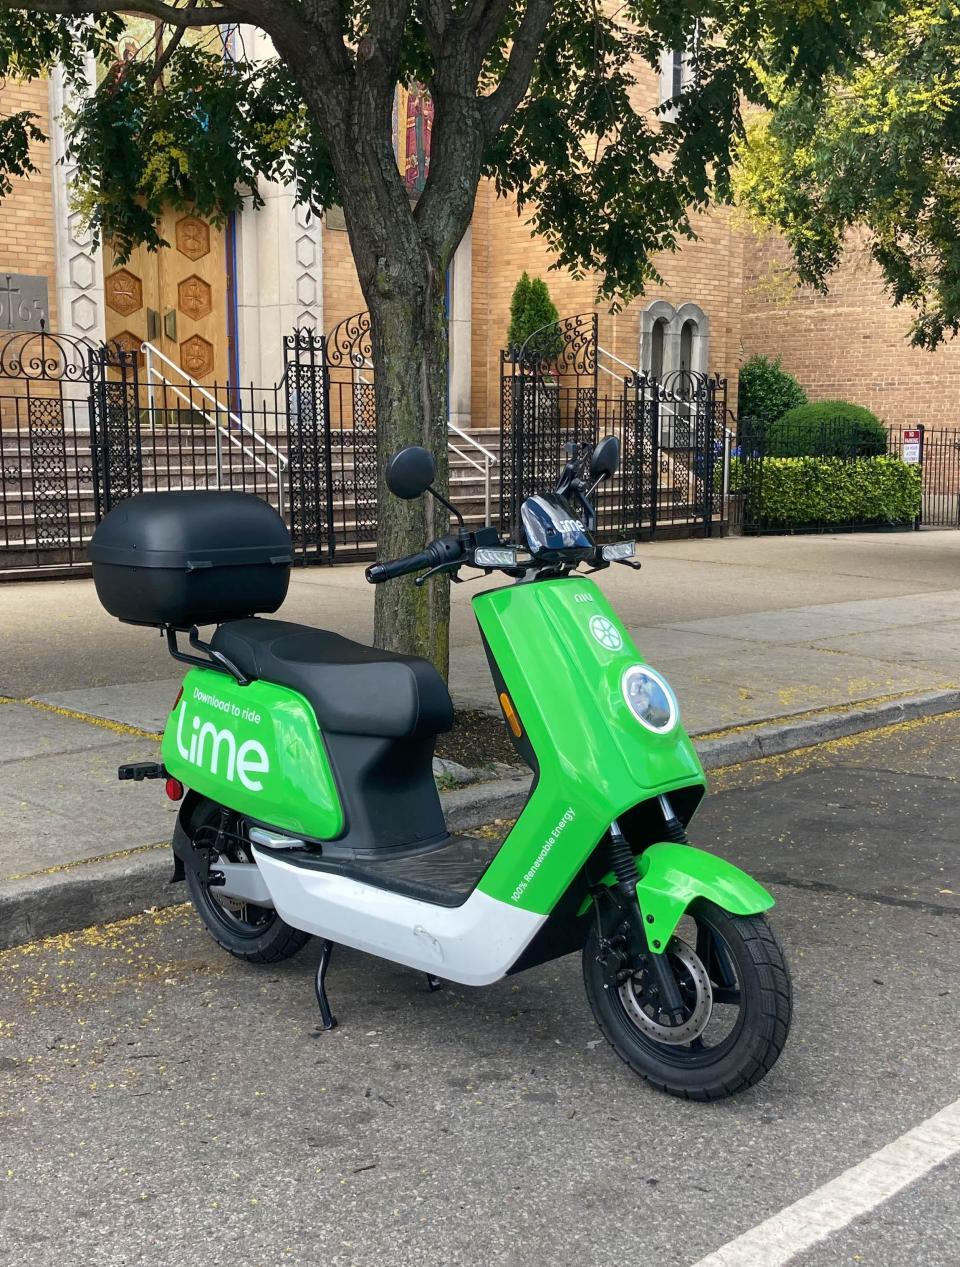 A bright green electric moped from the micromobility company Lime.